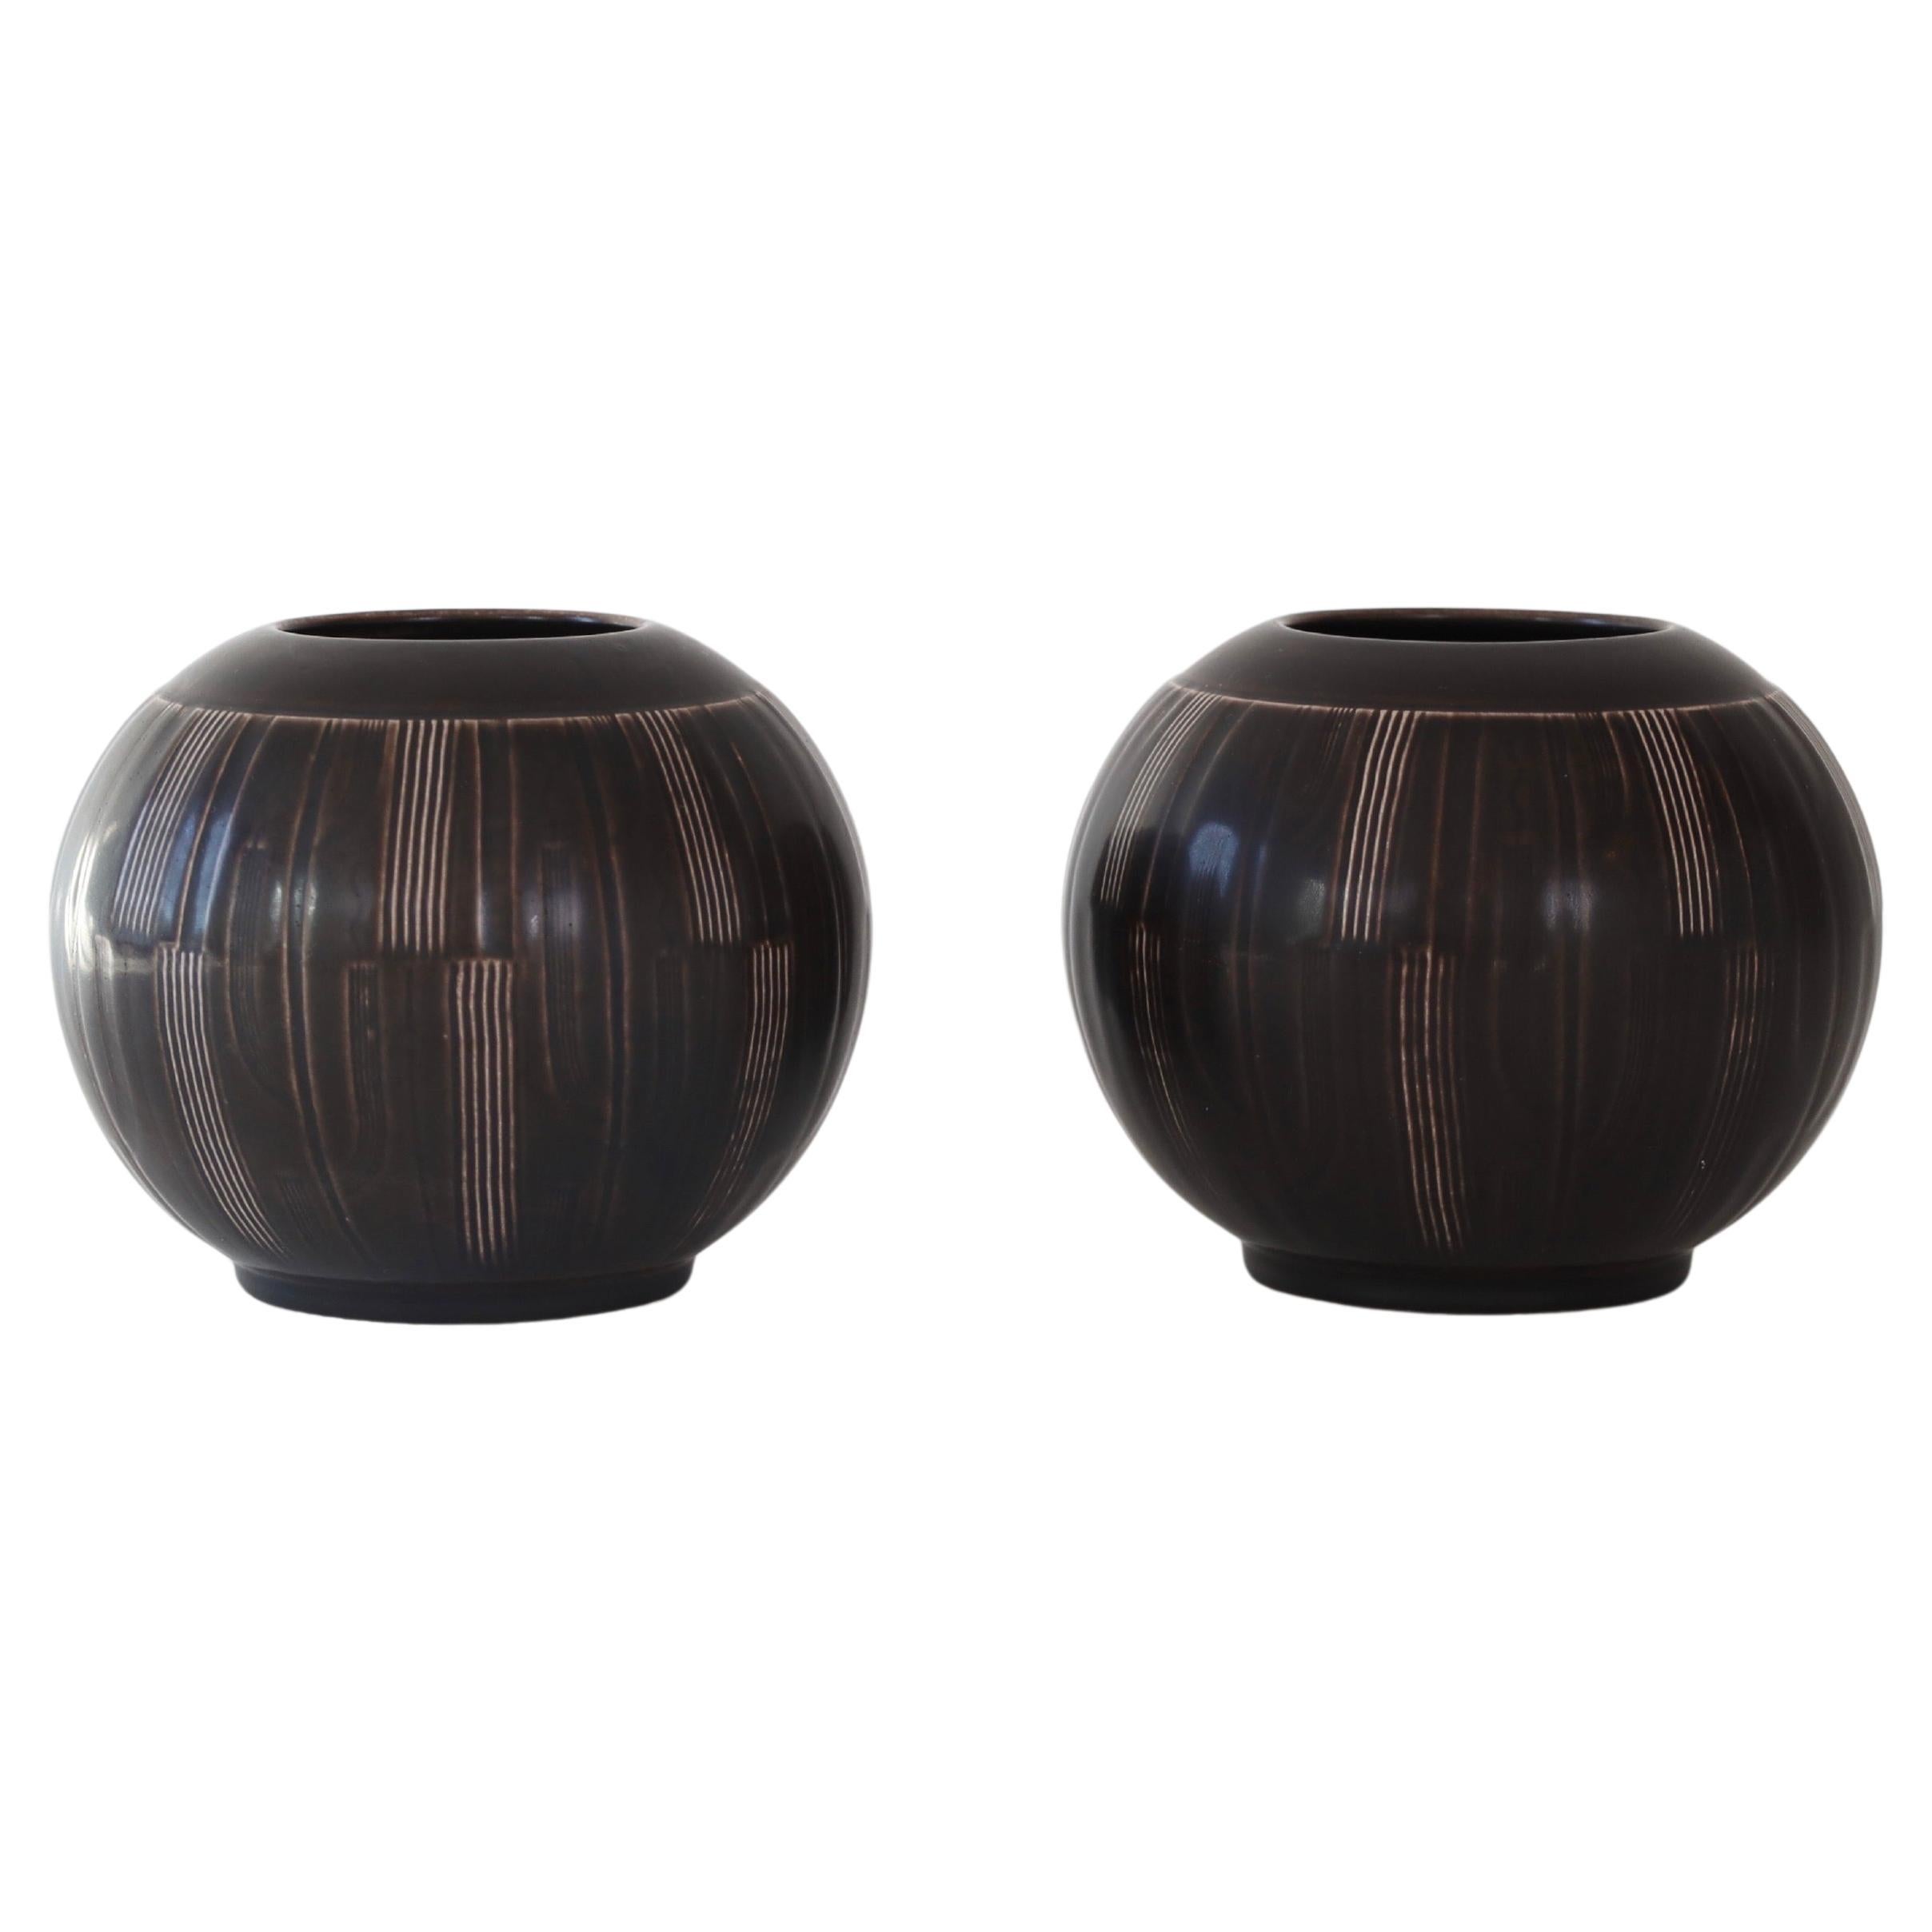 Set of vases by Nils Thorsson for Aluminia, 1950s, Denmark For Sale